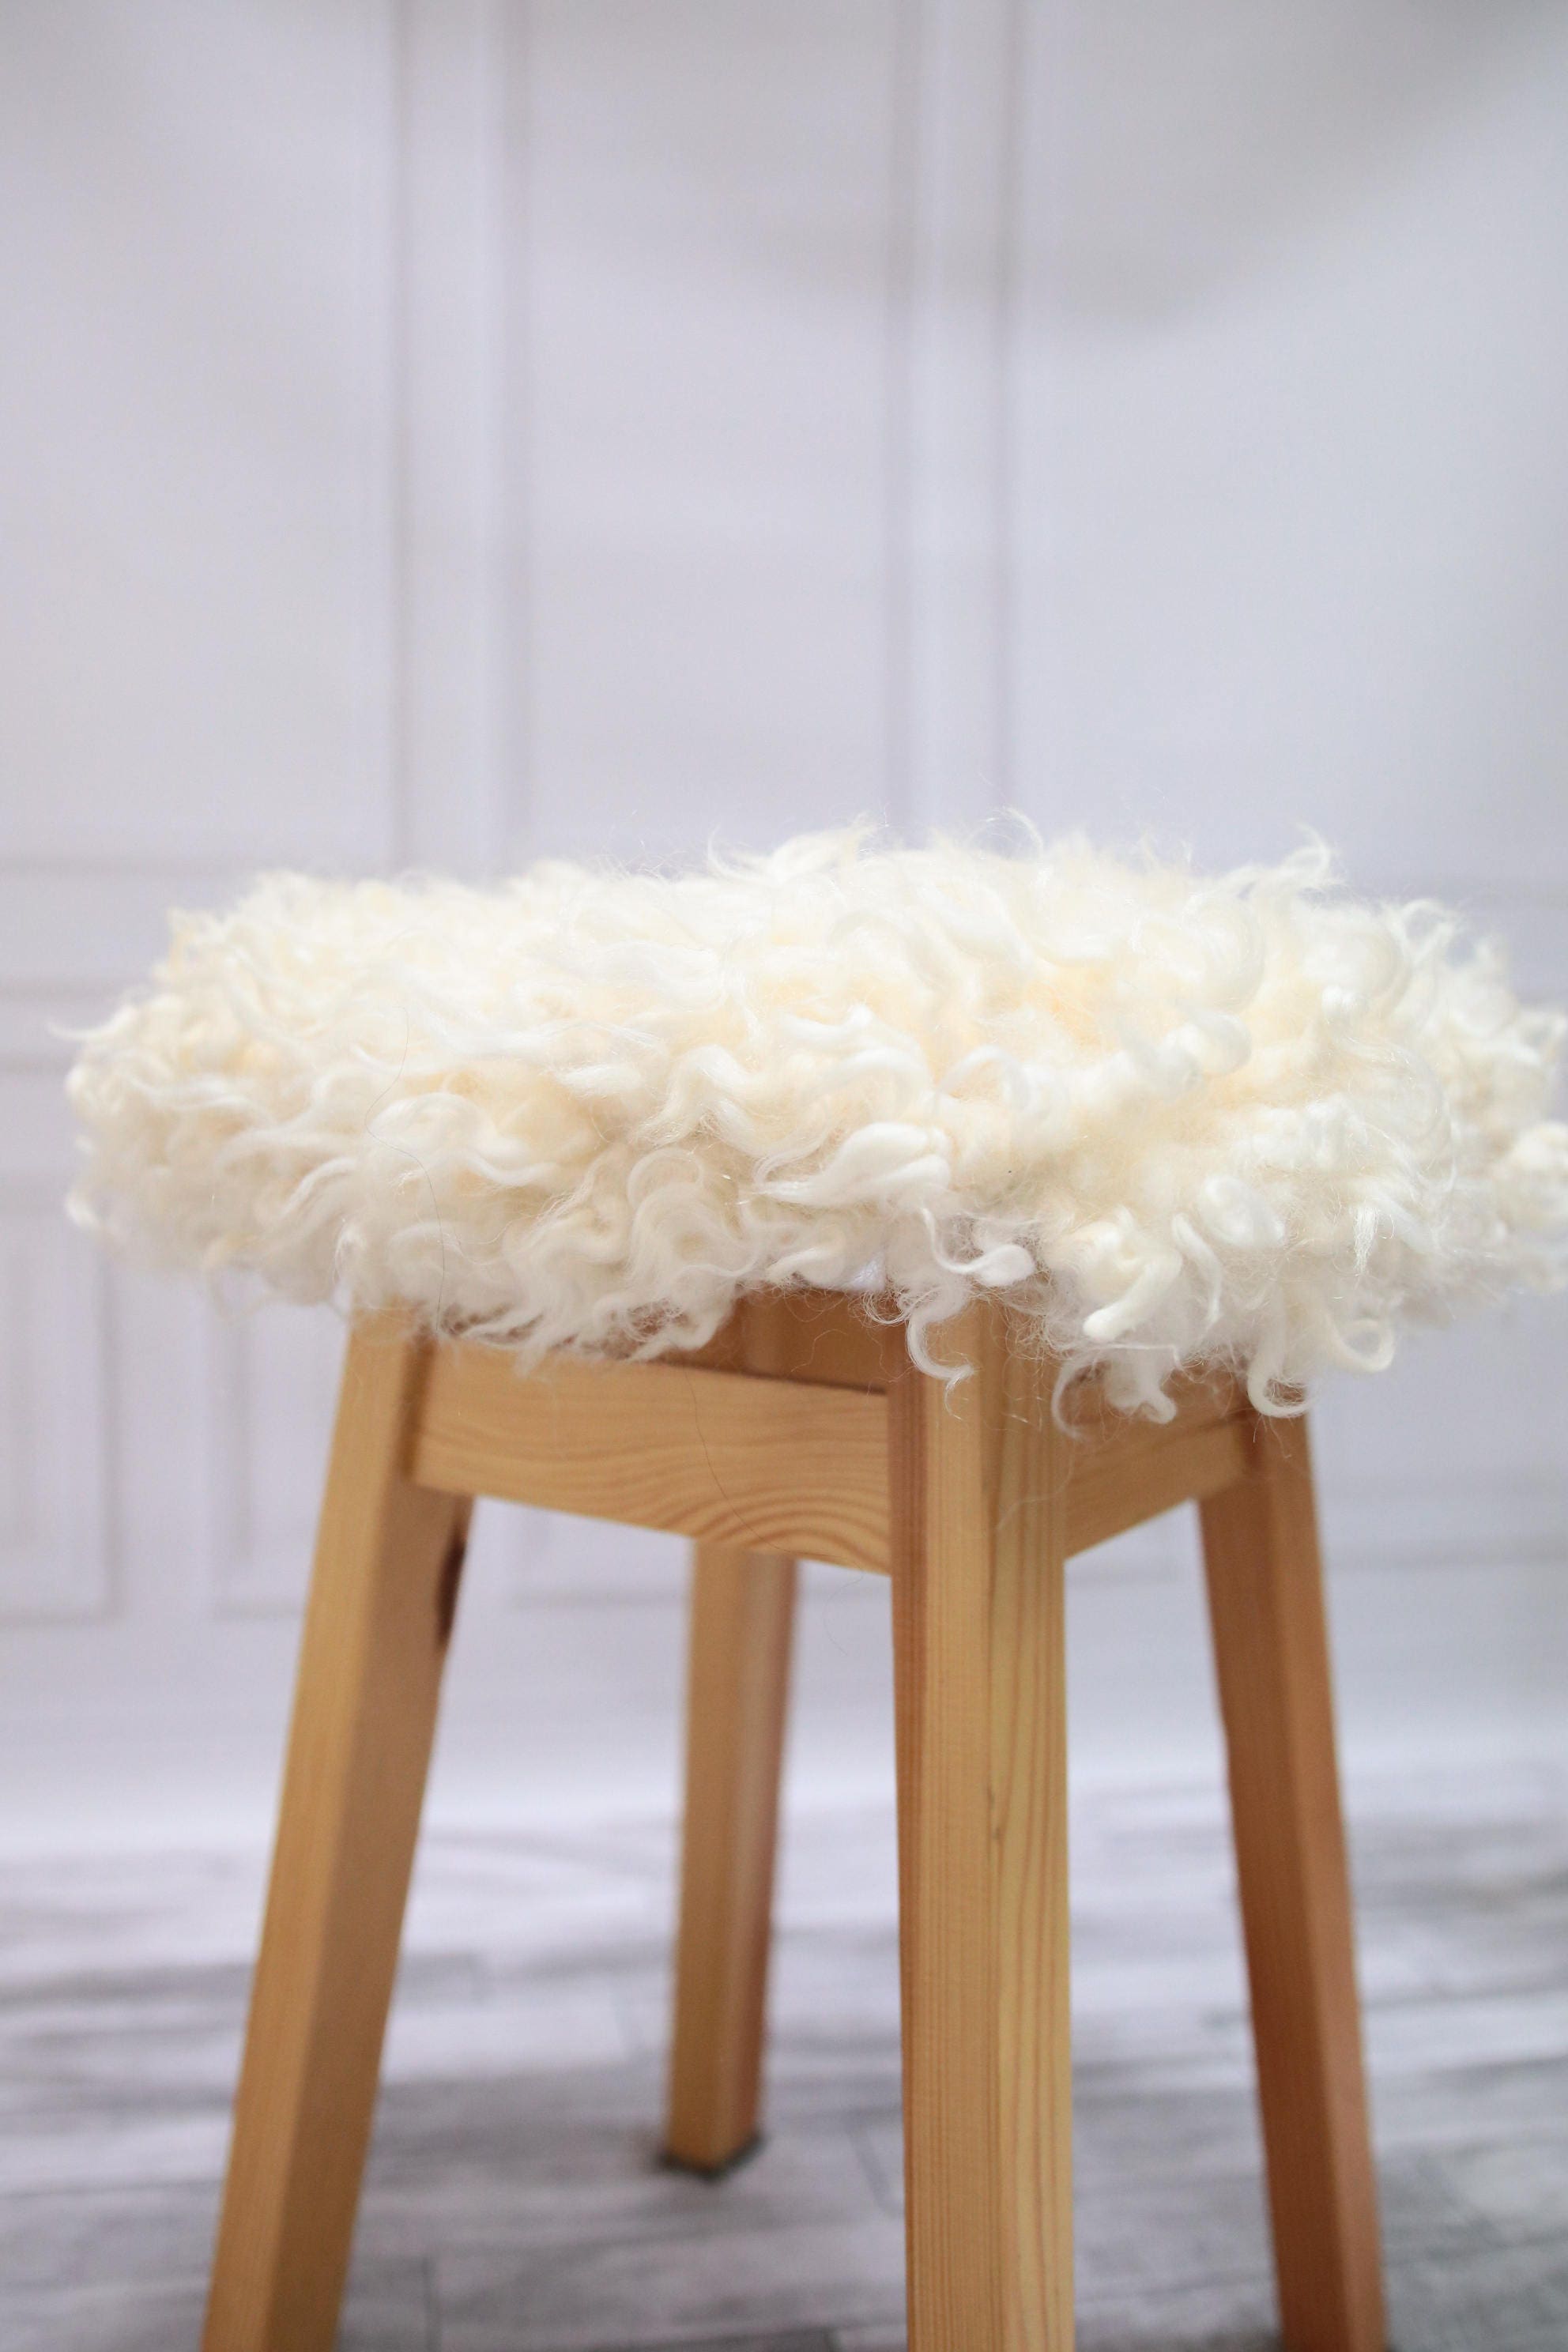 Furry Stool Chairl Cover On Sale Stool Cover Scandinavian Decor Seat Pad Sheepskin Stool Cover Chair Pad Home Living Chair Pads Covers Sultralineid